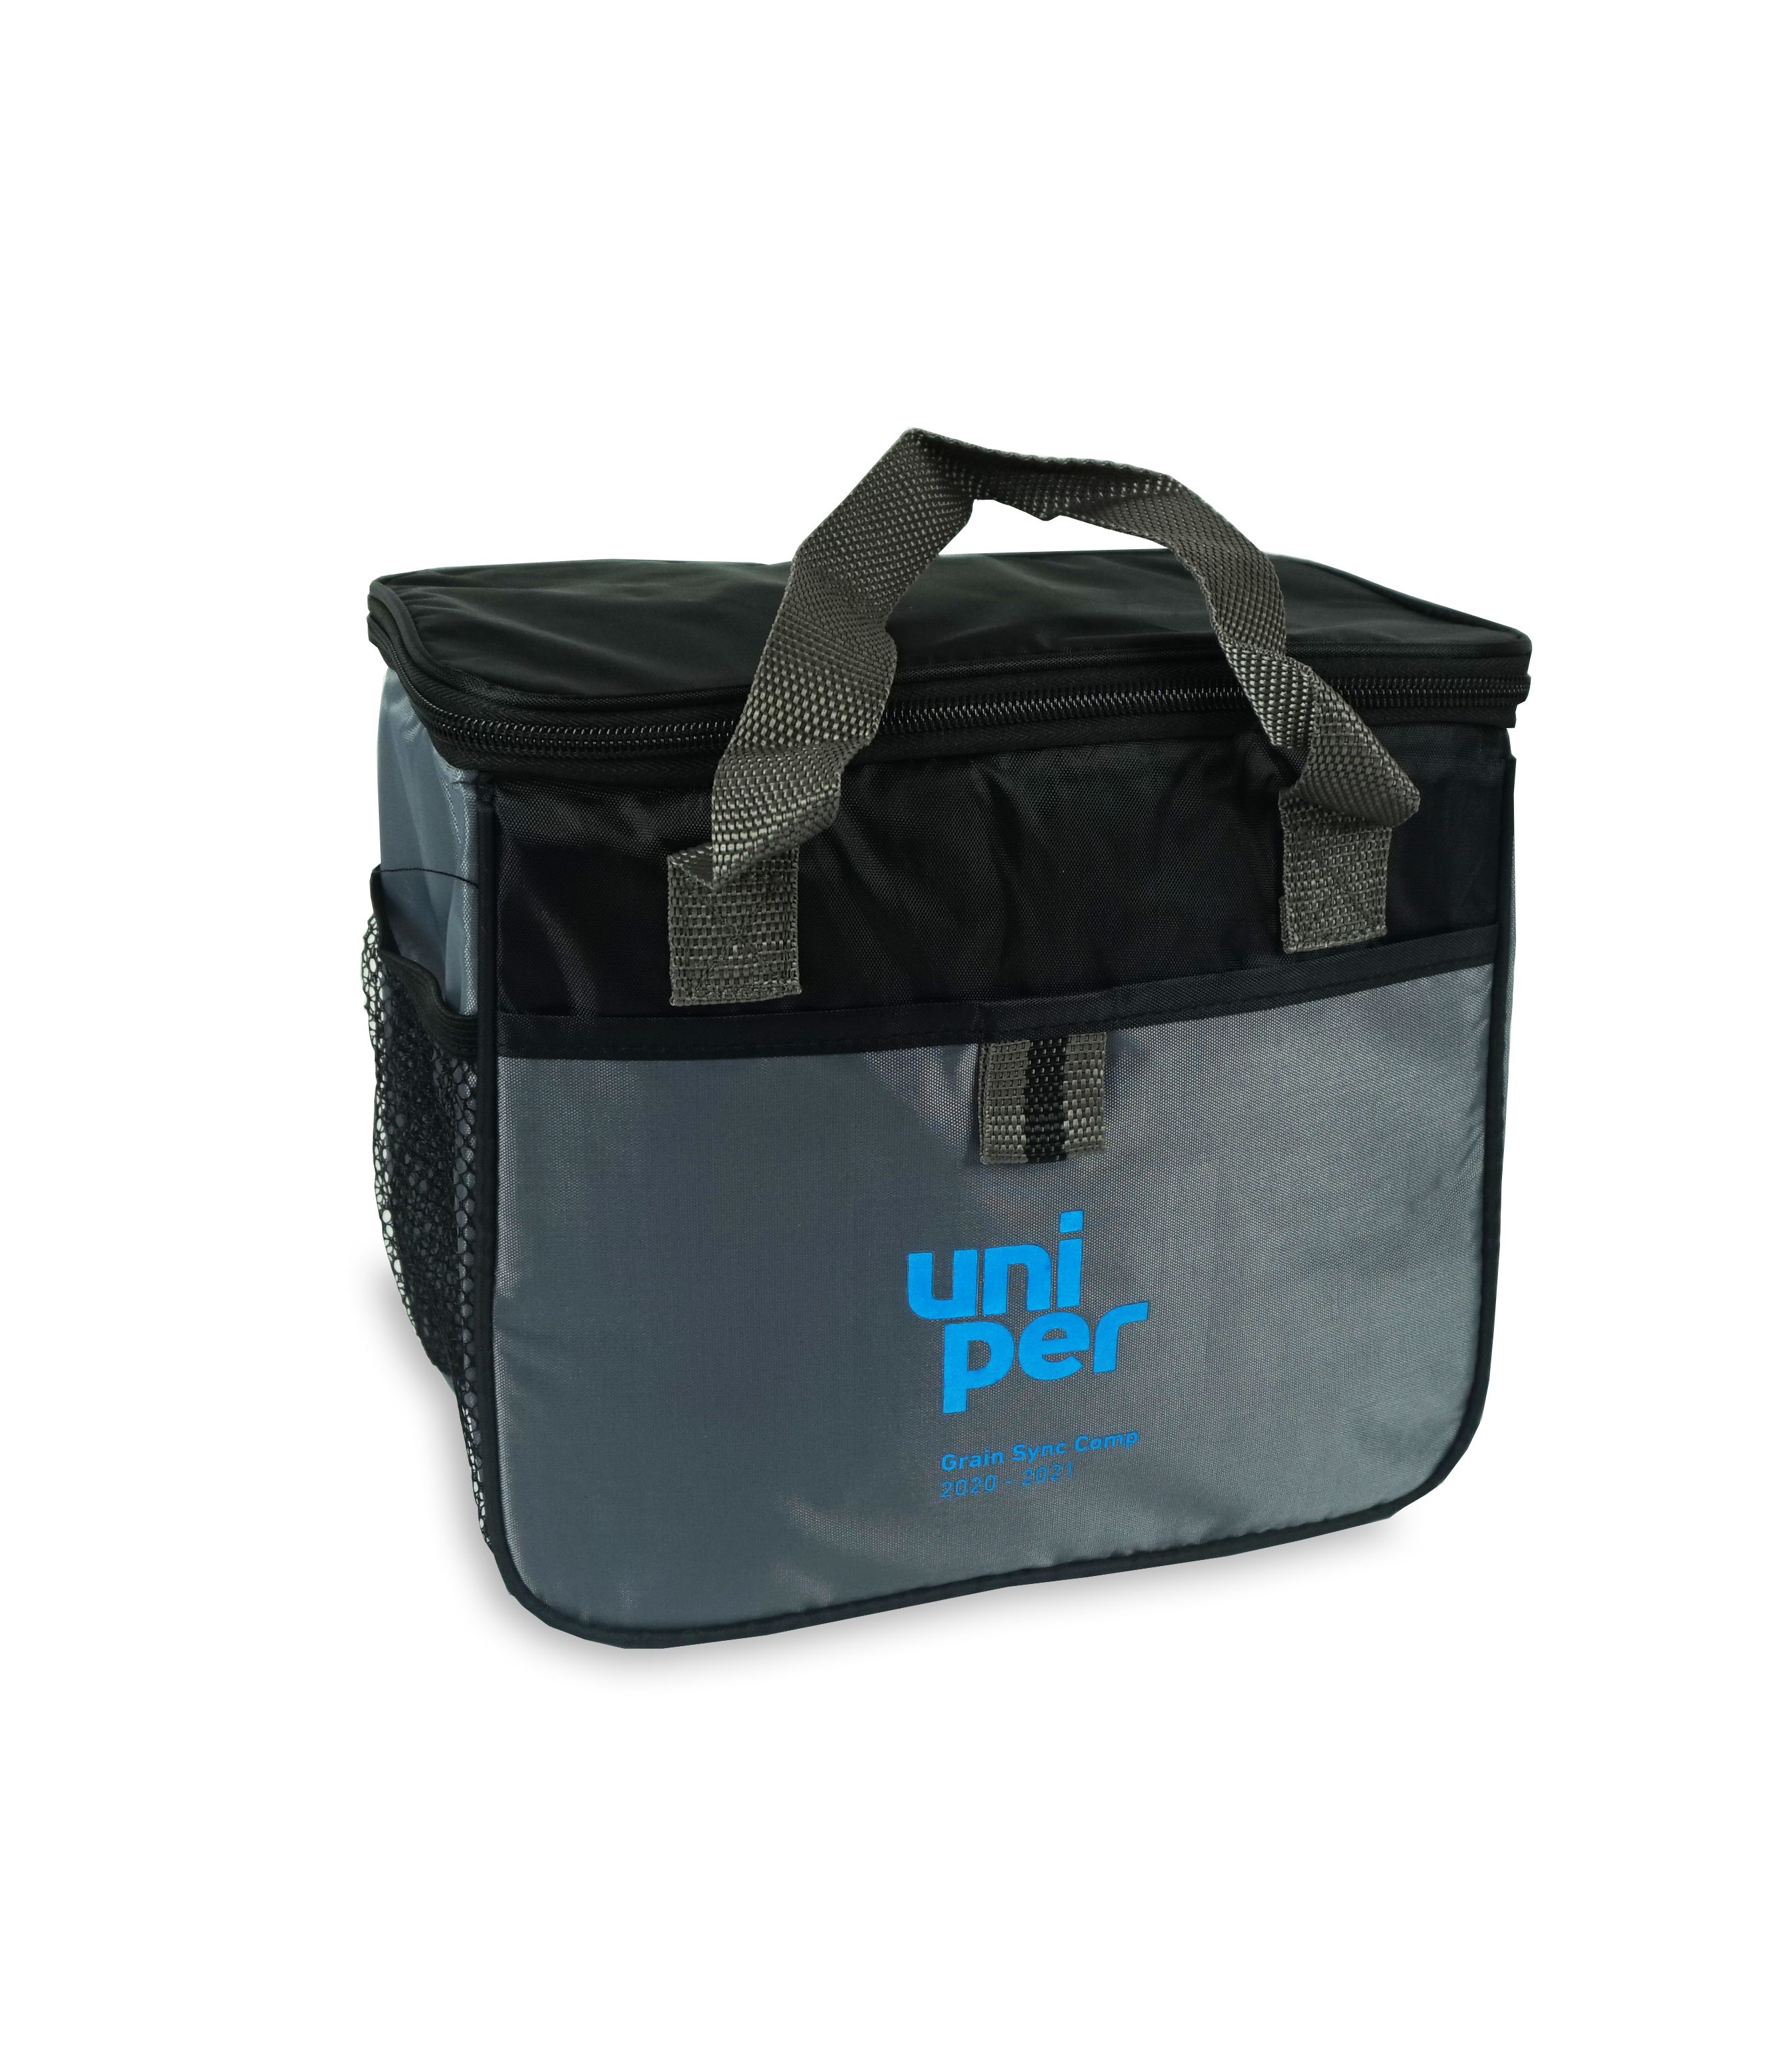 Branded Lunch Bags